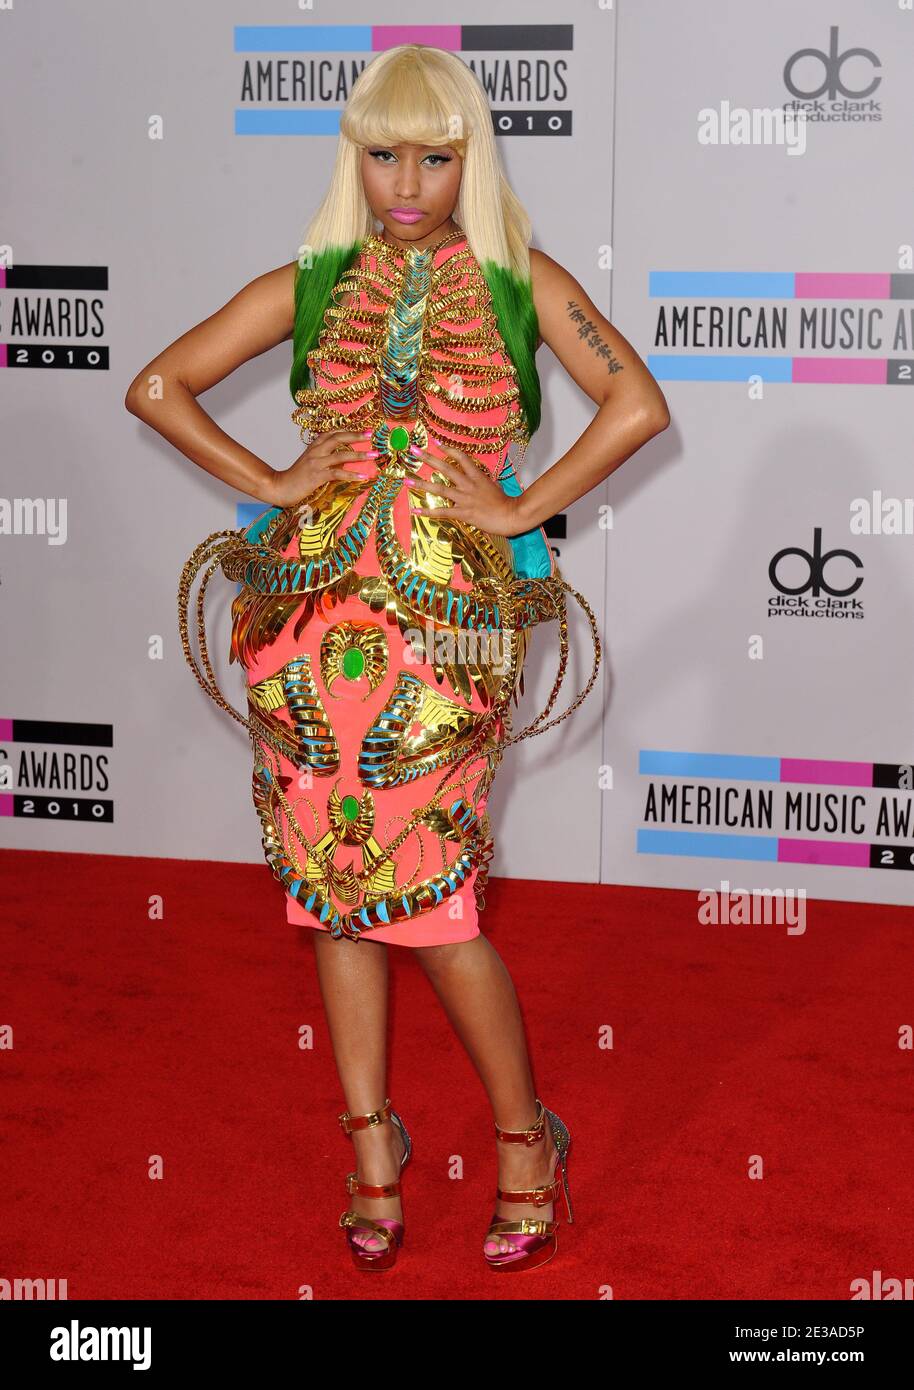 Nicki Minaj attends the 2010 American Music Awards at the Nokia Theatre in Los Angeles, November 21, 2010. Photo by Lionel Hahn/ABACAPRESS.COM Stock Photo